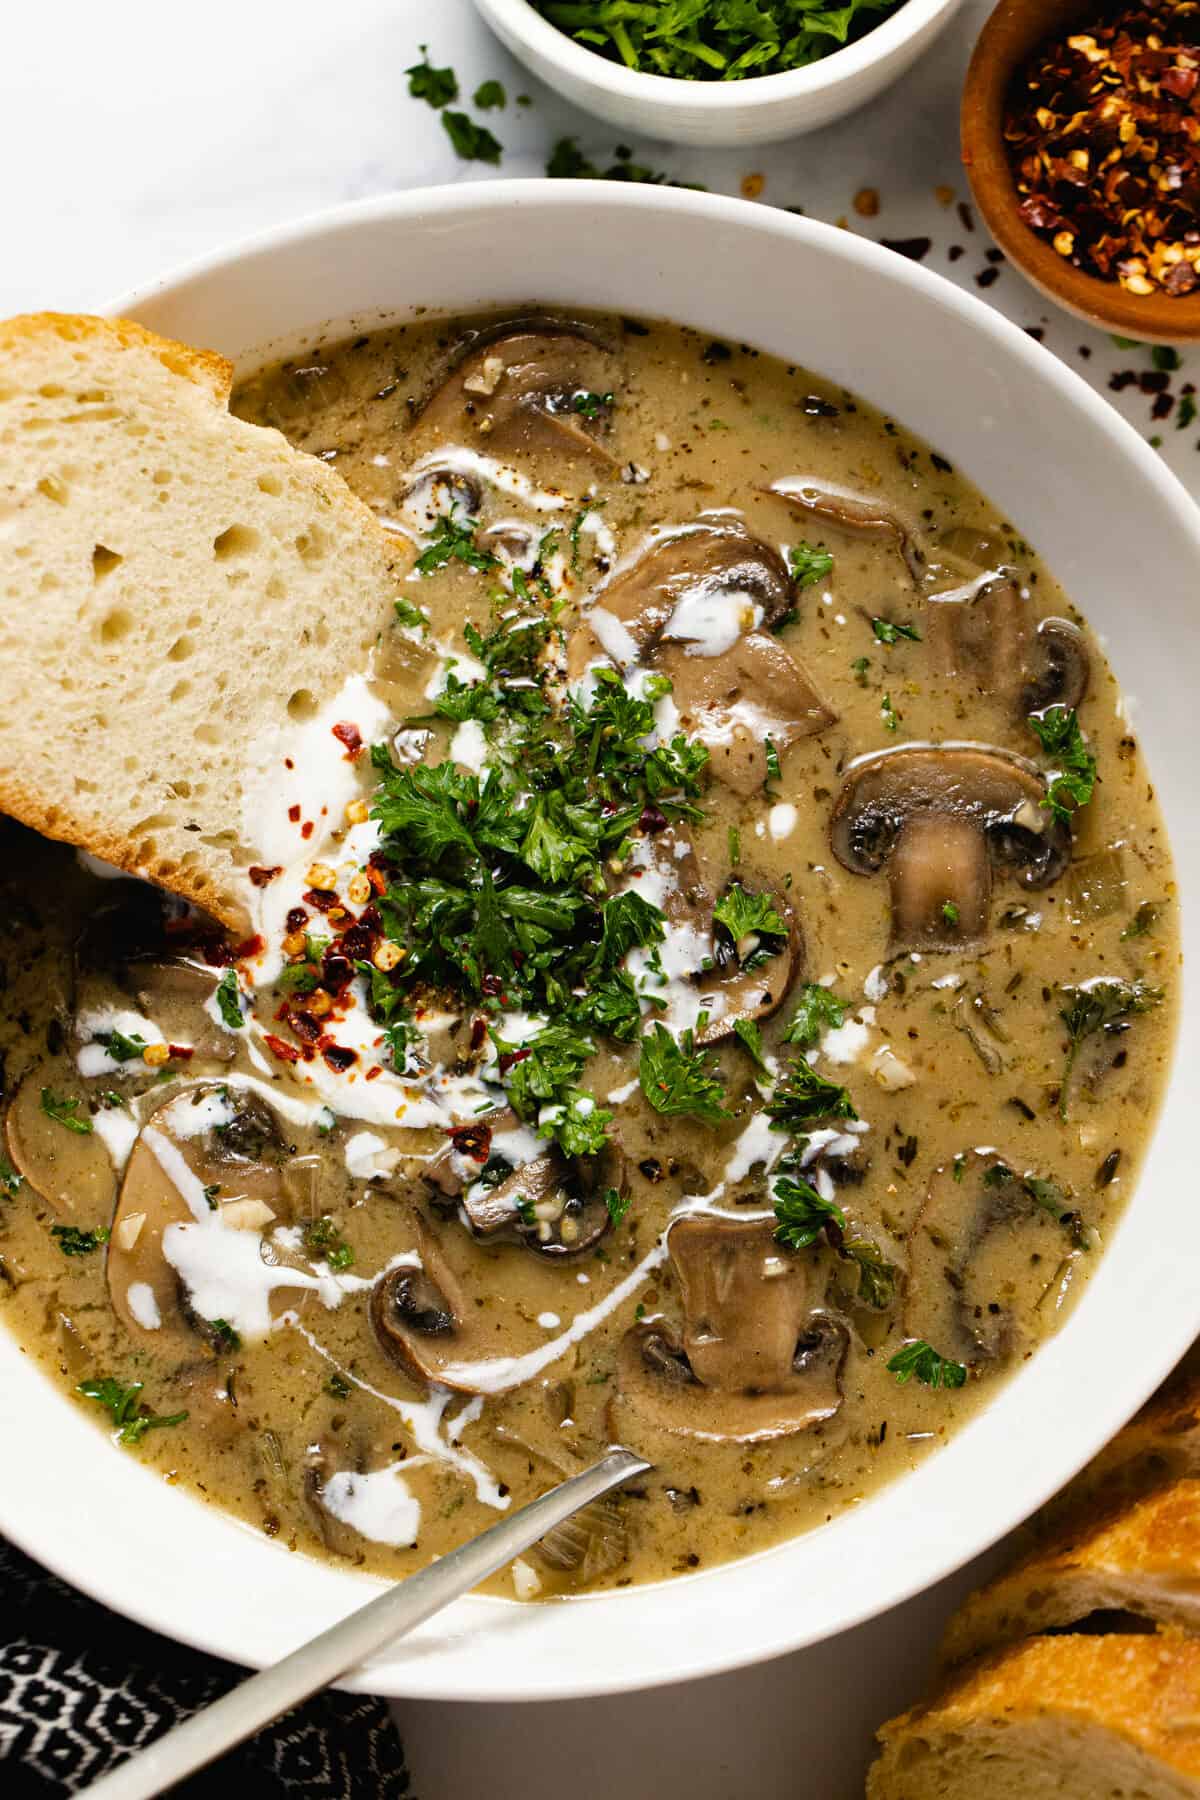 Overhead shot of a white bowl filled with vegan mushroom soup garnished with parsley